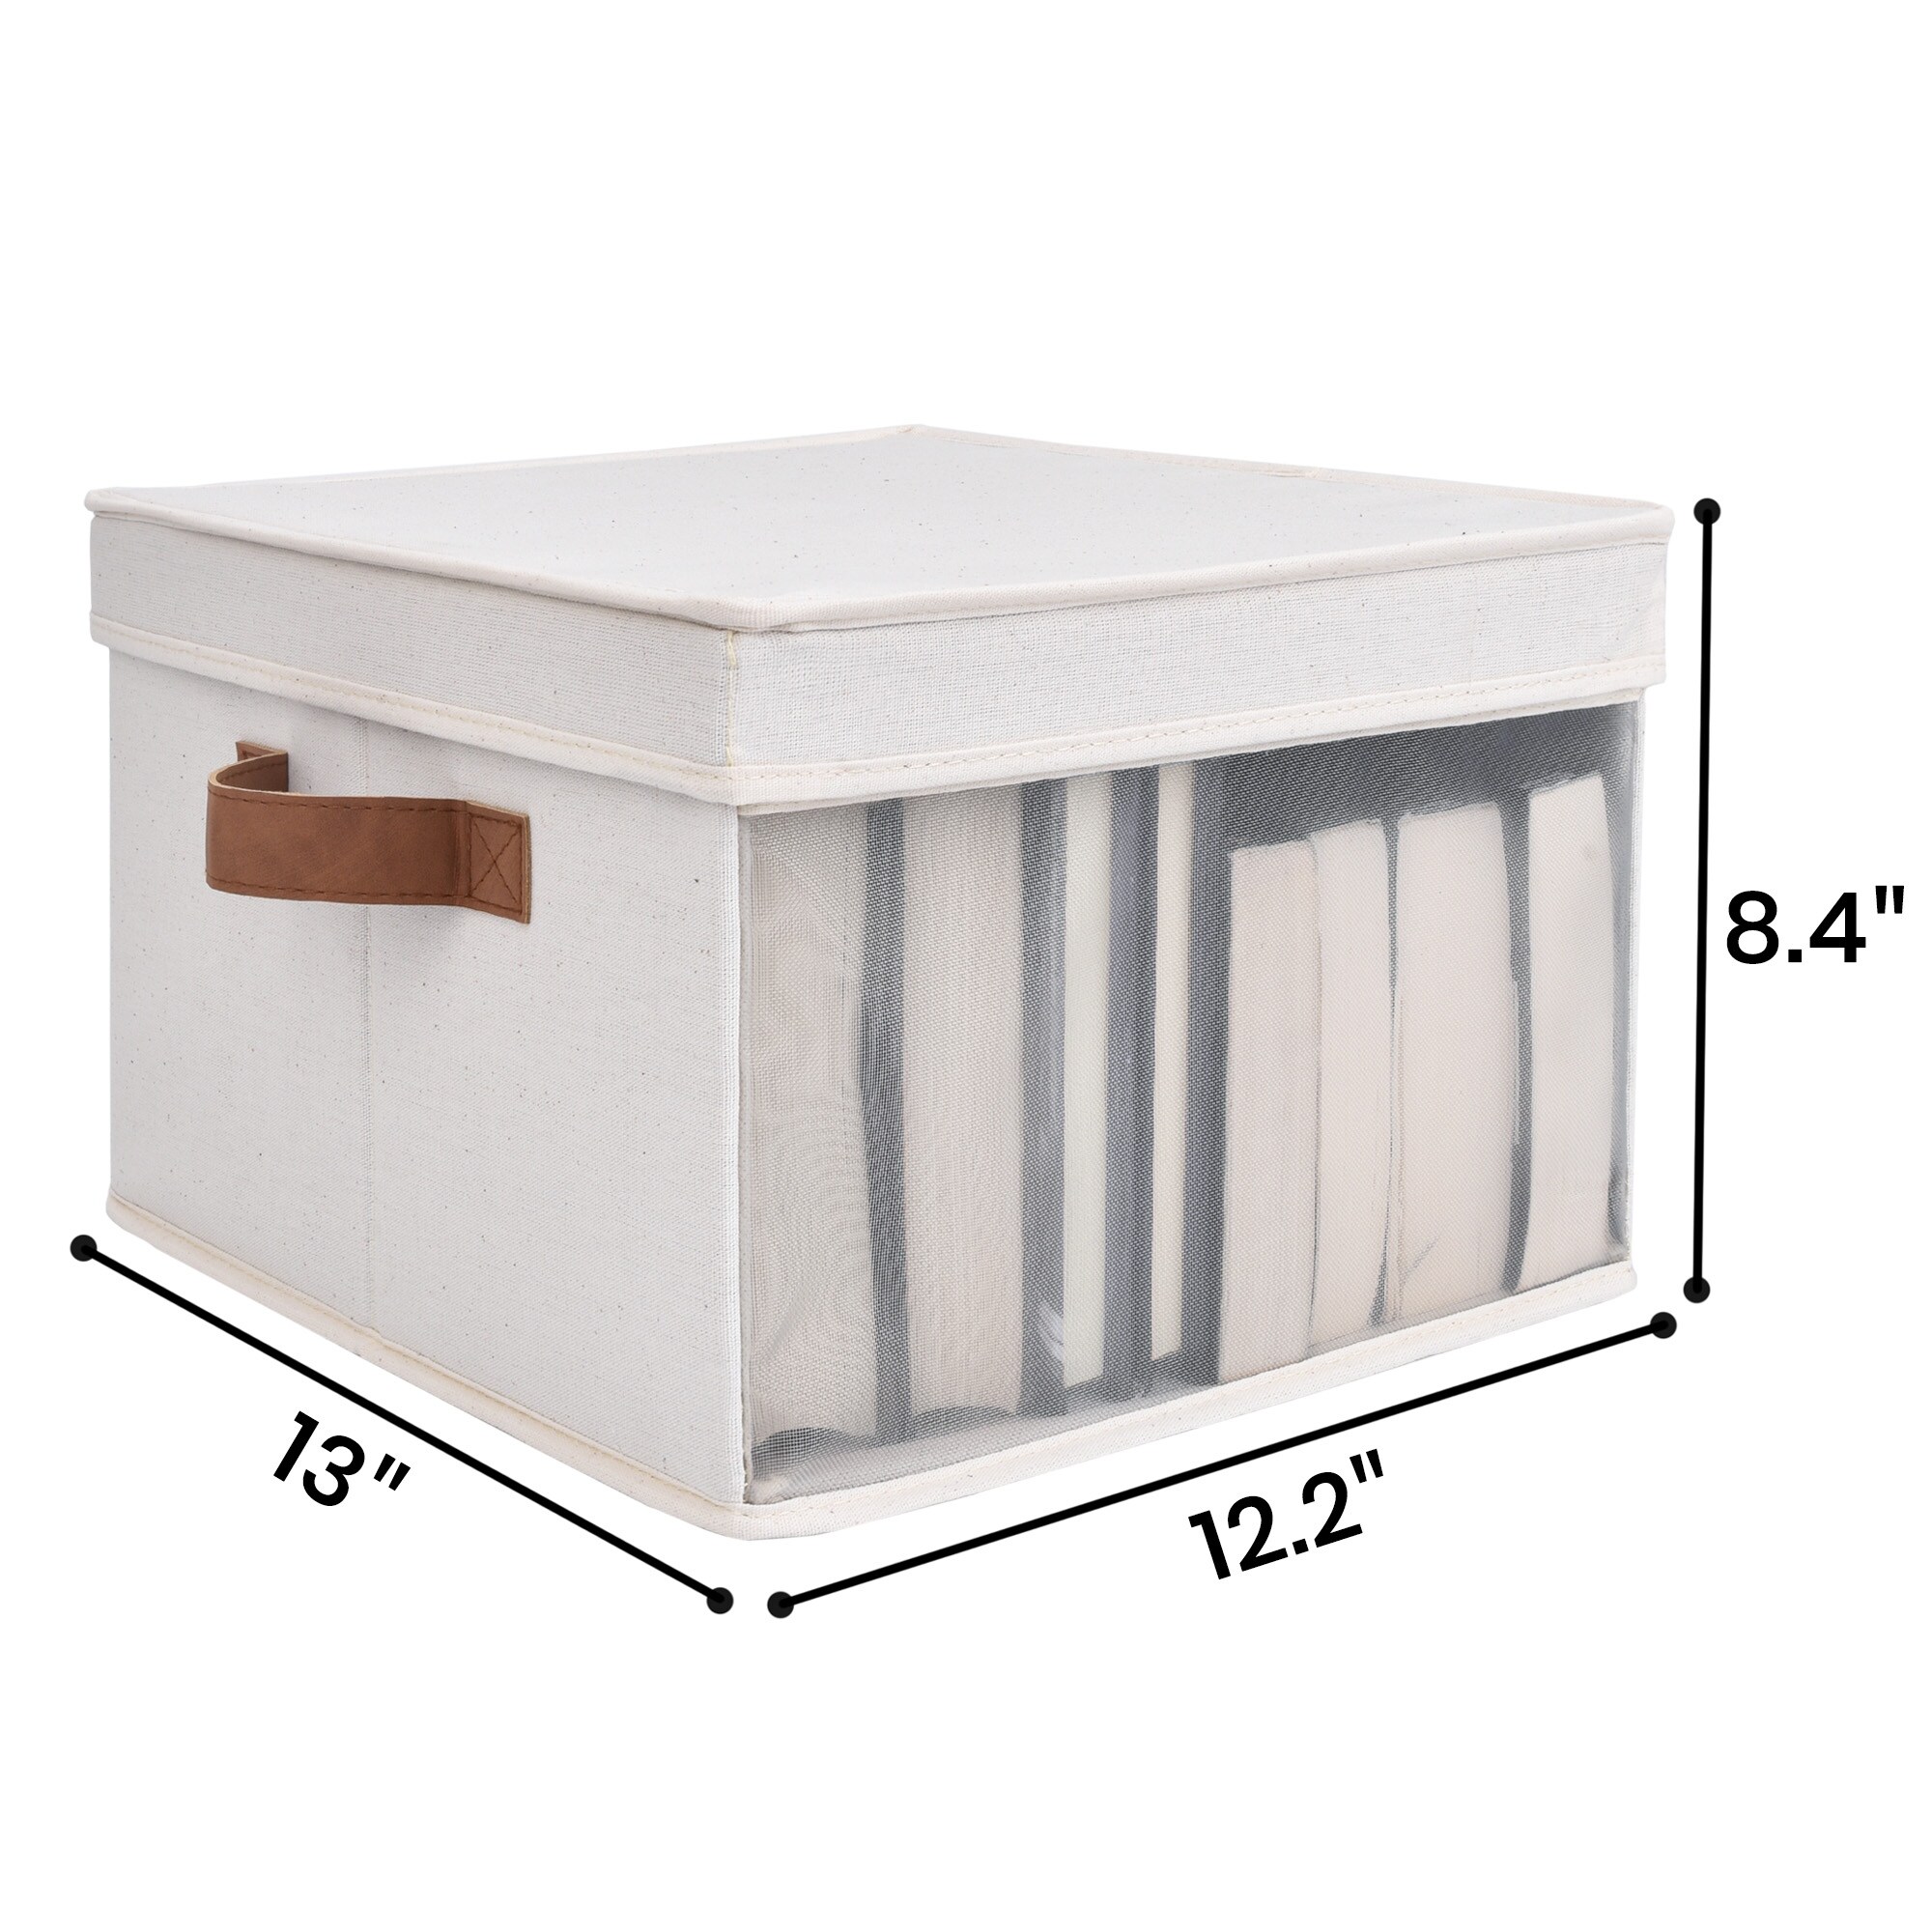 https://ak1.ostkcdn.com/images/products/is/images/direct/c3de4fa9b04a1c9cceff35a98ef0b5d681d43b2d/StorageWorks-Foldable-Fabric-Storage-Bins-with-Lids.jpg